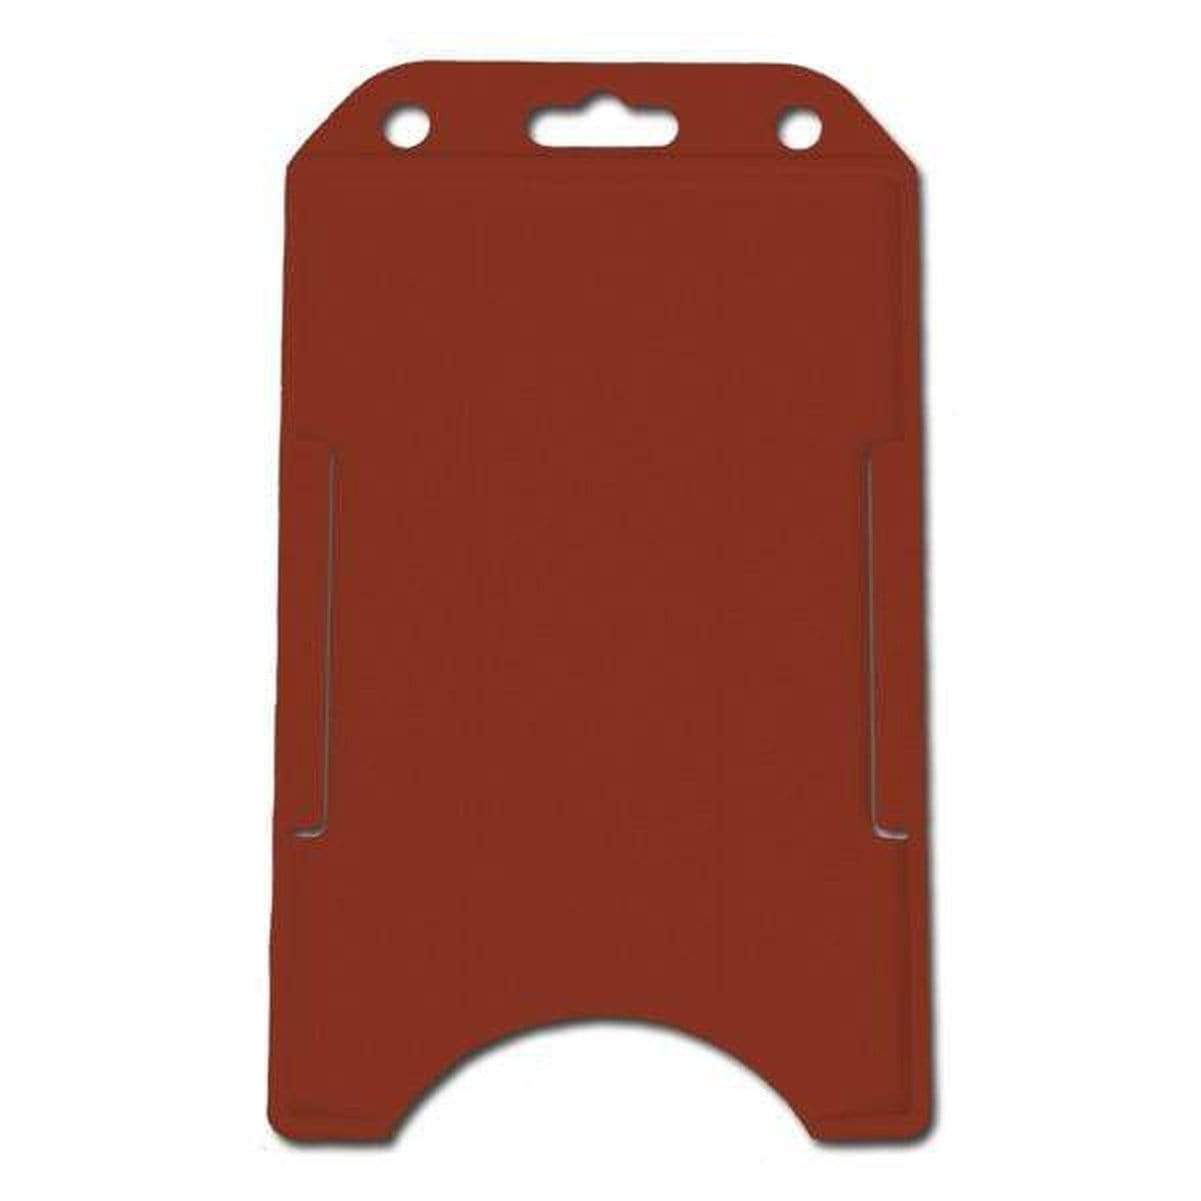 Frosted Vertical Rigid ID Badge Holder with Red Extractor Slide (p/n 1840-6566)